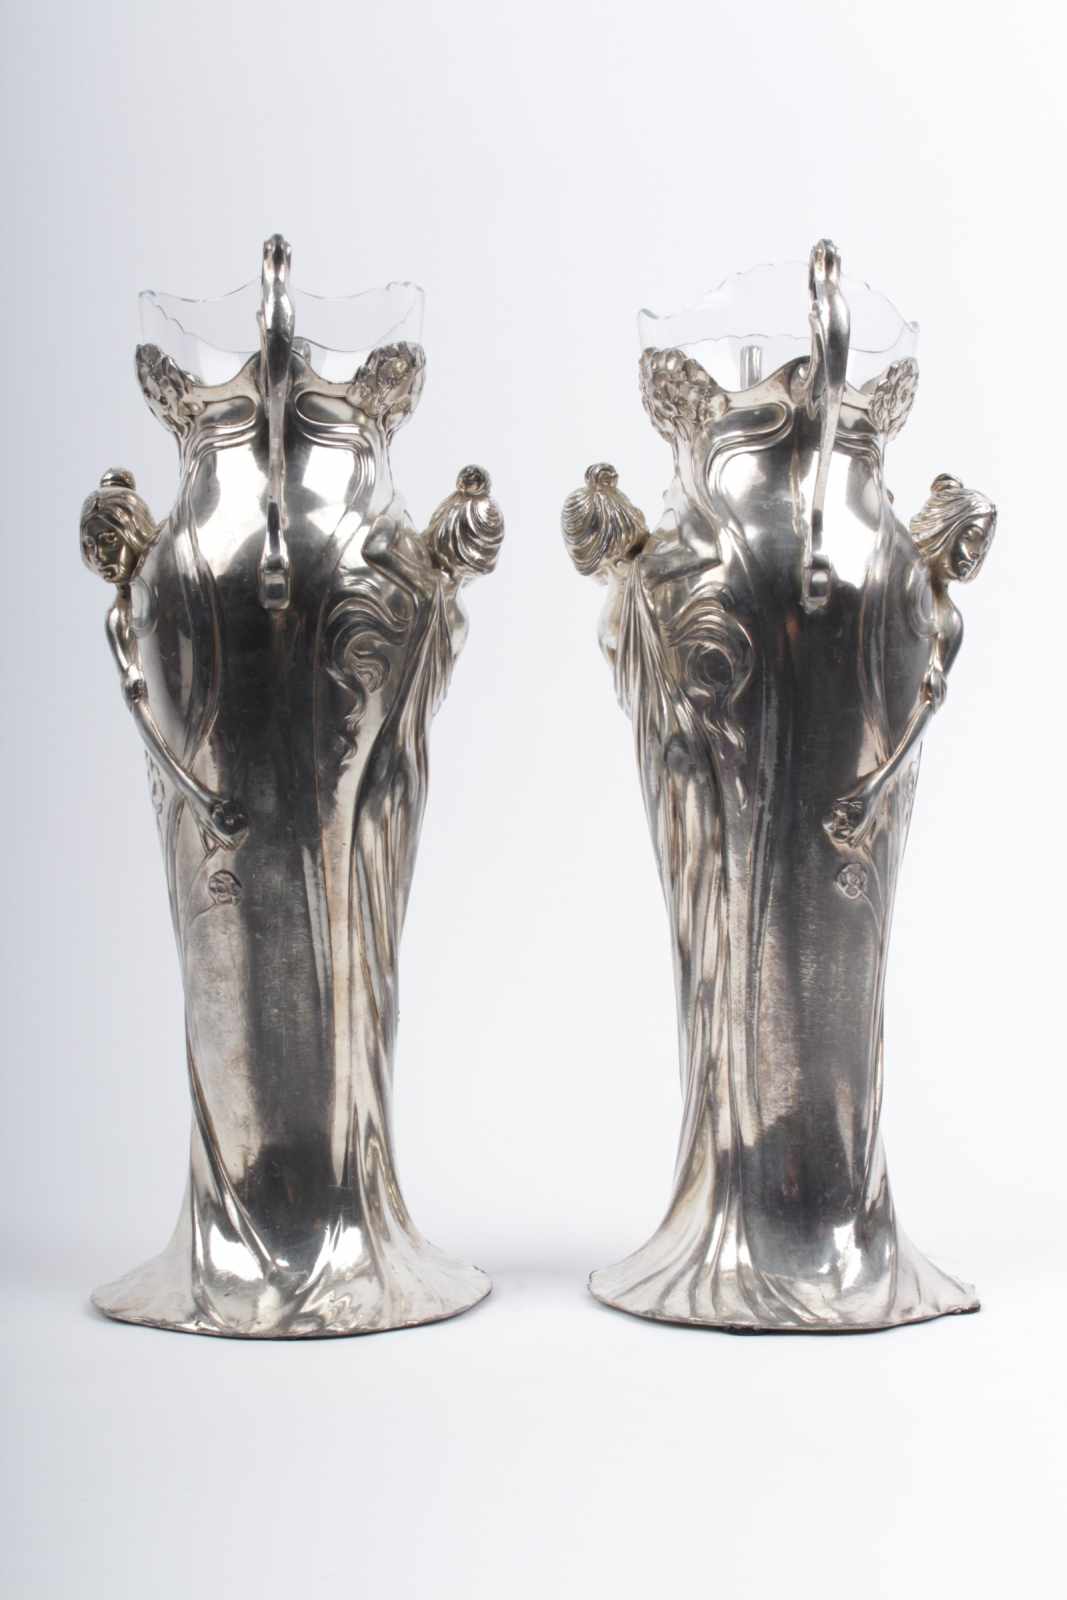 Art Nouveau vases WMF Germany, around 1906, paired pewter vases, silver plated, original glass - Image 4 of 6